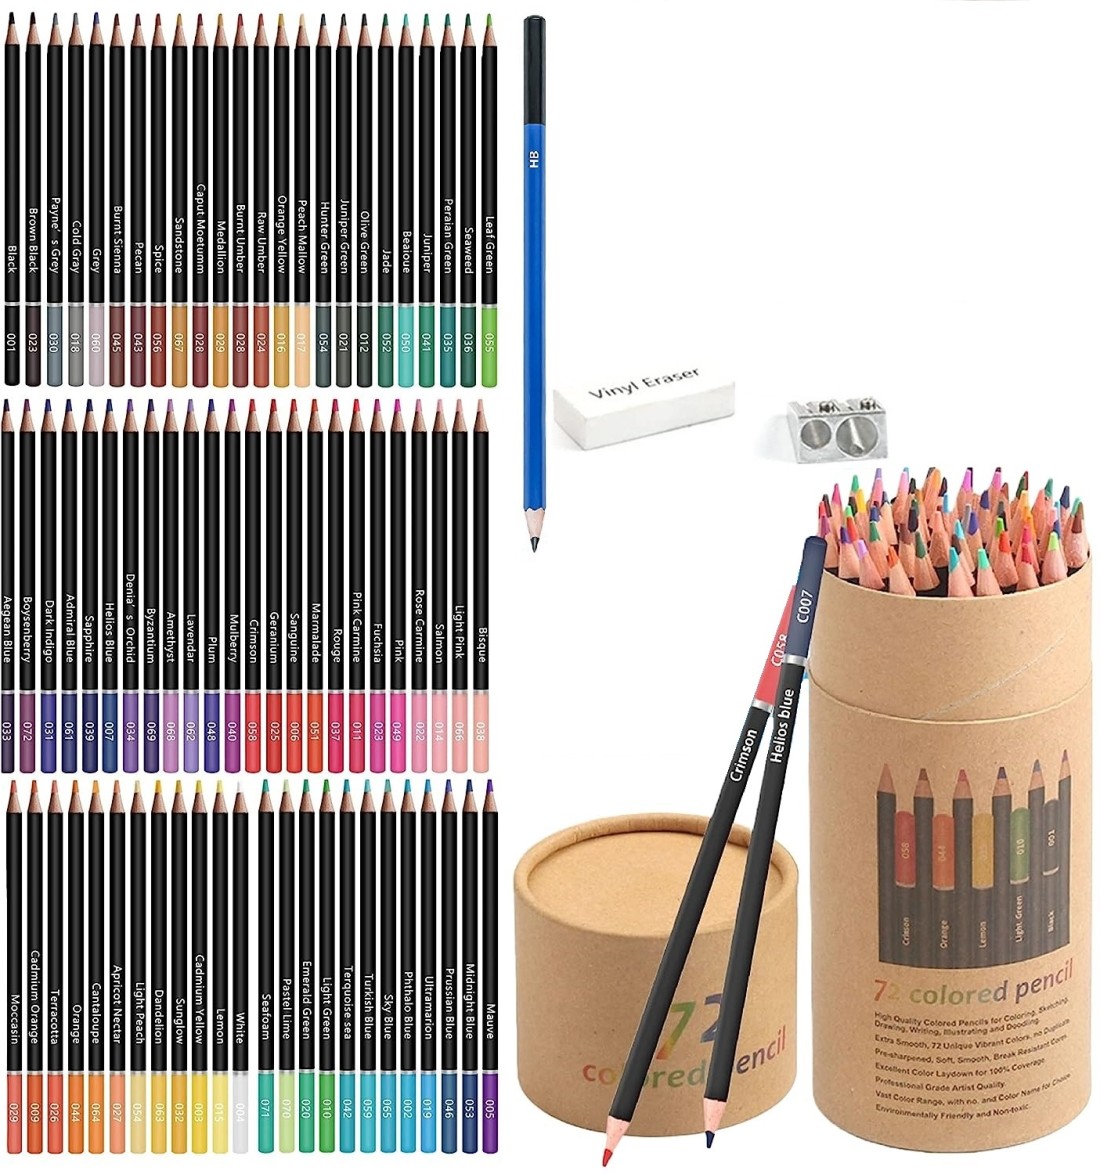 72 Colored Pencils - Professional Grade 72 Vibrant Color Pre-sharpened  Colored Pencil Set for Drawing, Sketching, Coloring Book